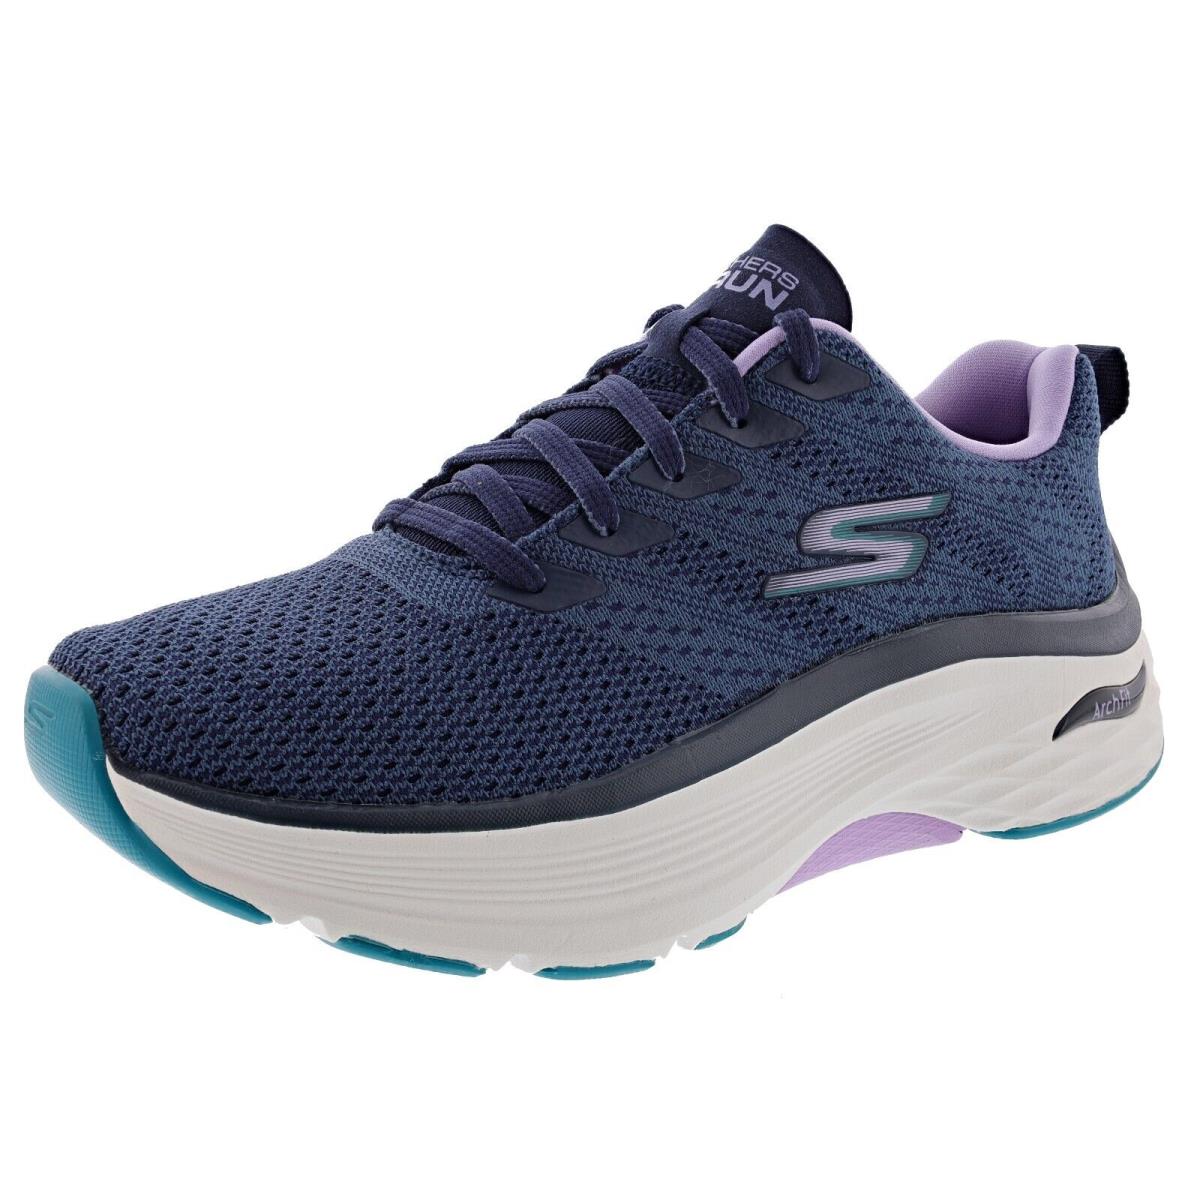 Skechers Women`s Max Cushioning Arch Fit Goodyear Performance Walking Shoes Navy